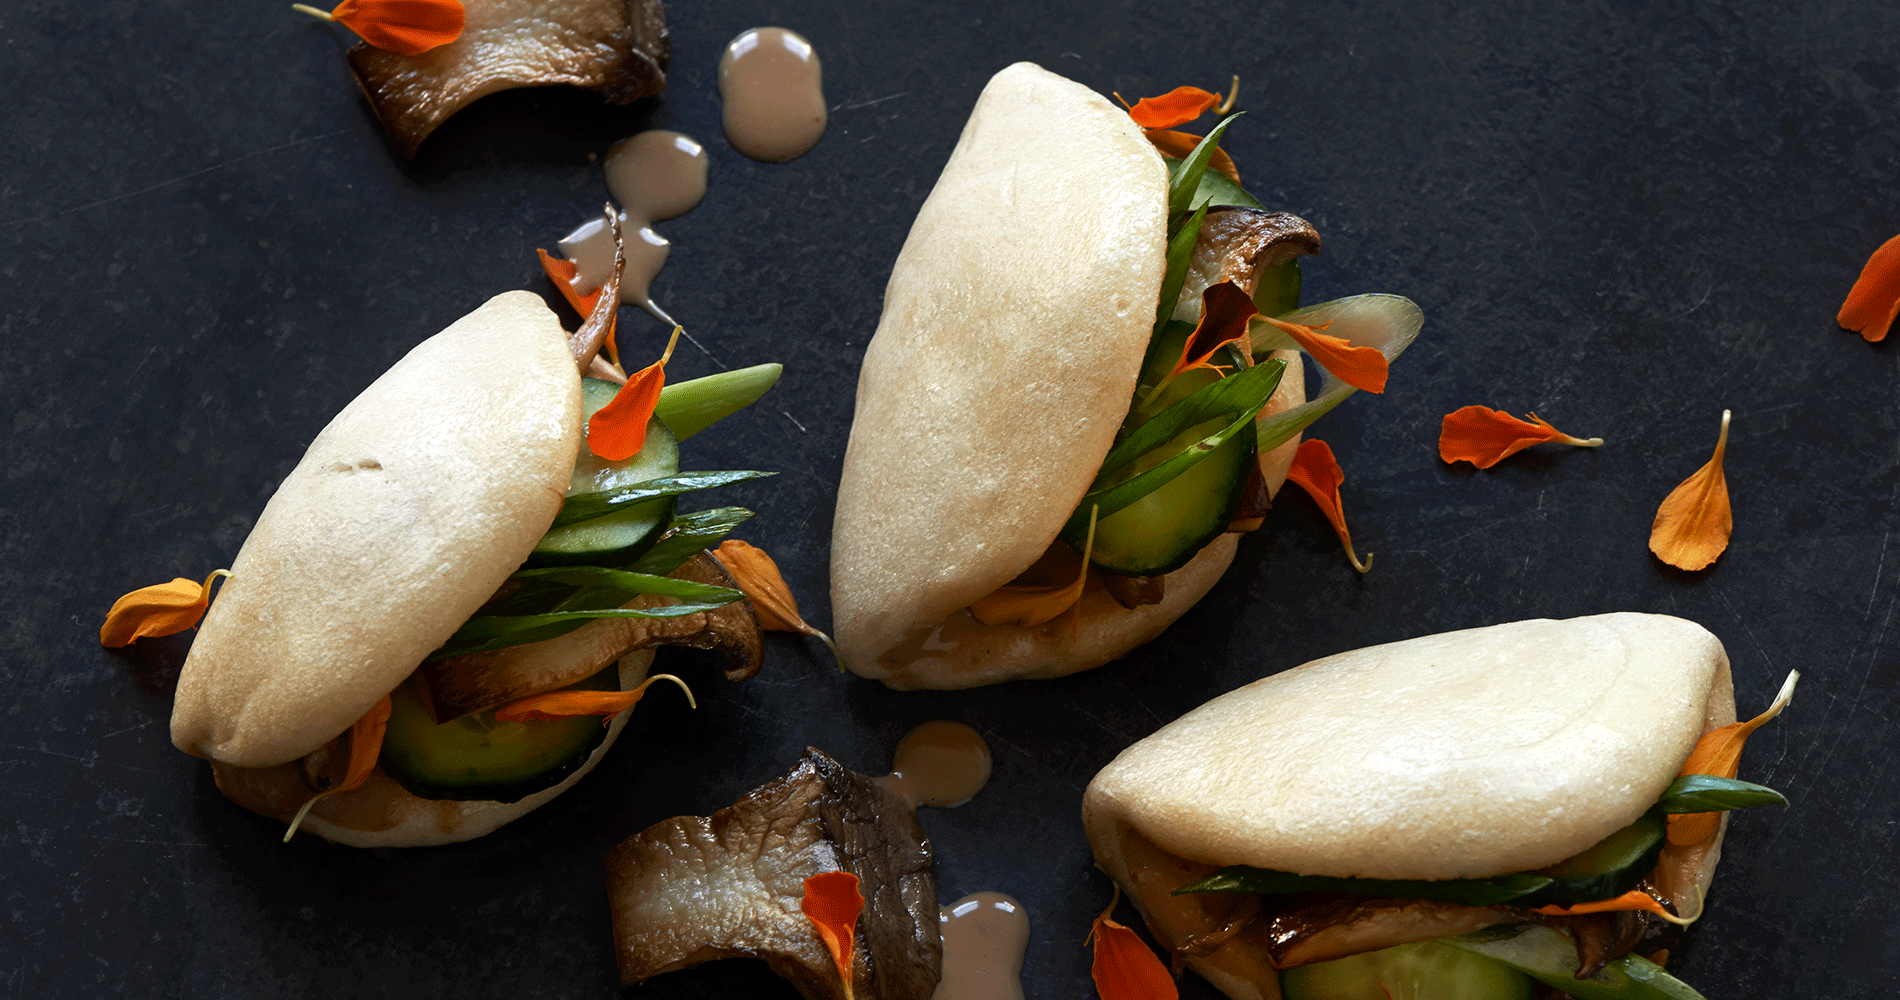 Steamed buns filled with veggies